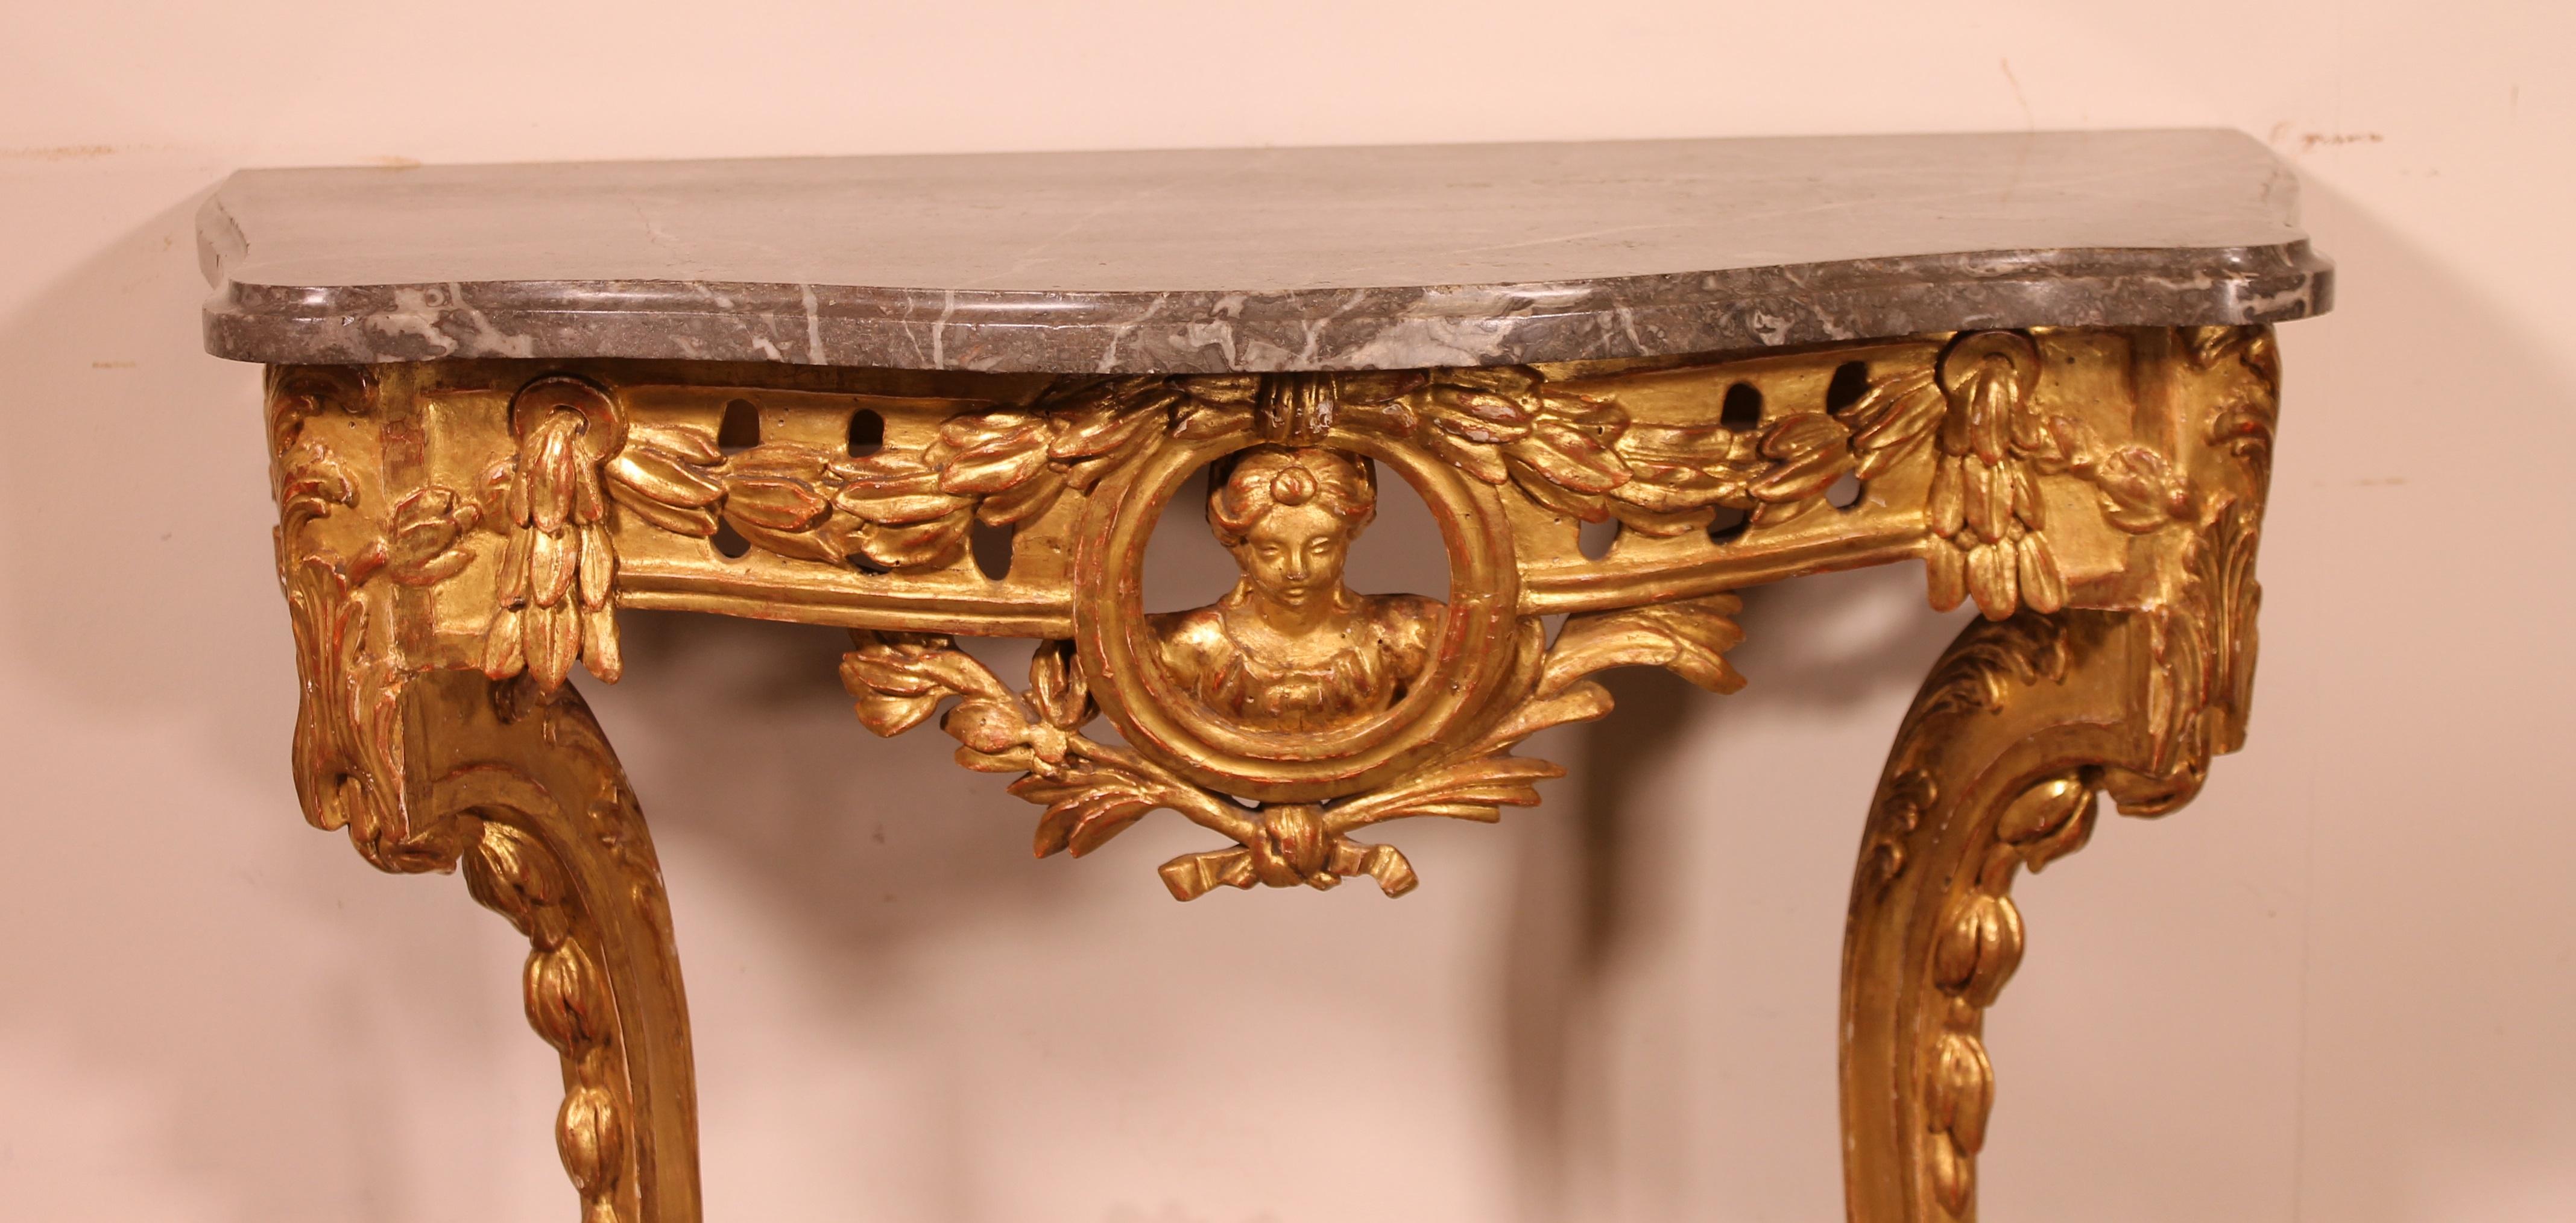 A fine French console in gilded wood from the 18th century transition period (Louis XV-Louis XVI)
A very elegant curved facade that is carved with acanthus leaves and a character representing a woman in its center

The console is topped with a